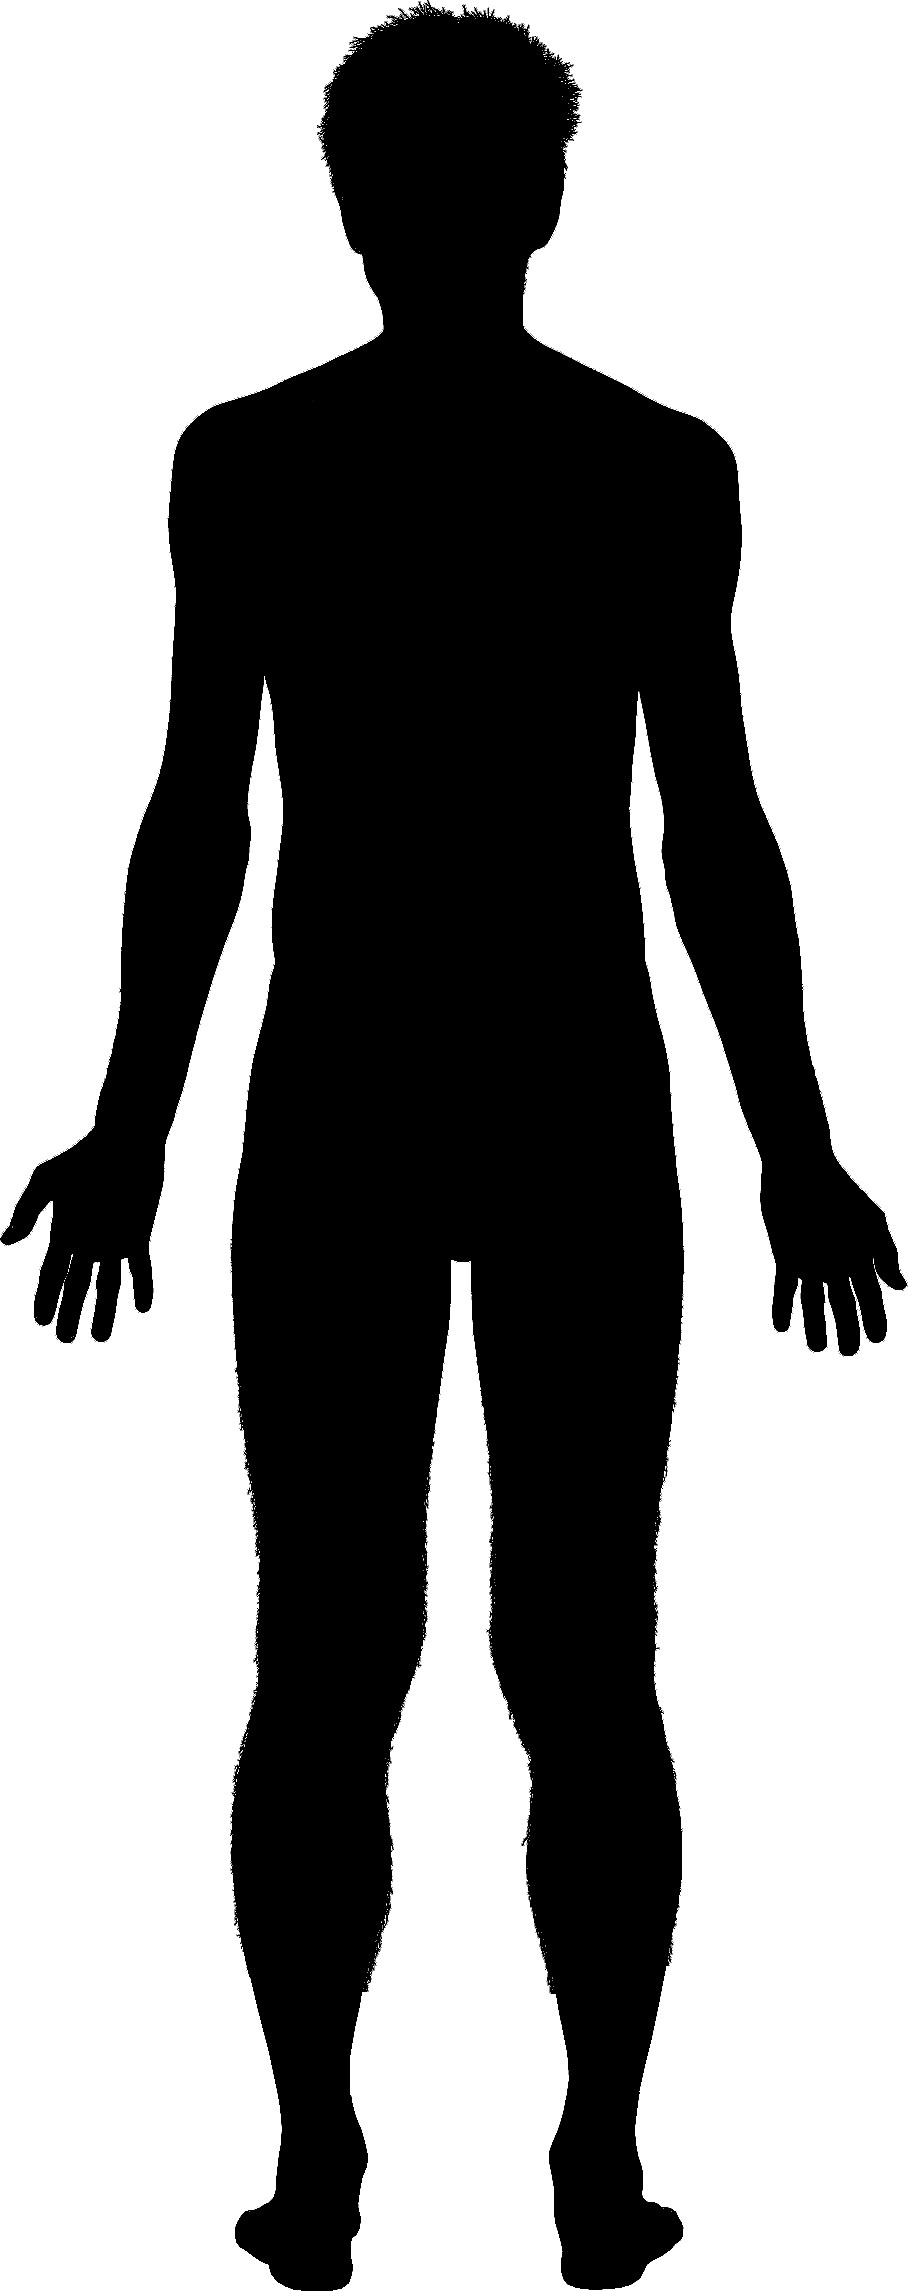 Outline Of A Human Png Human Body Outline Transparent Human Body Outline Png